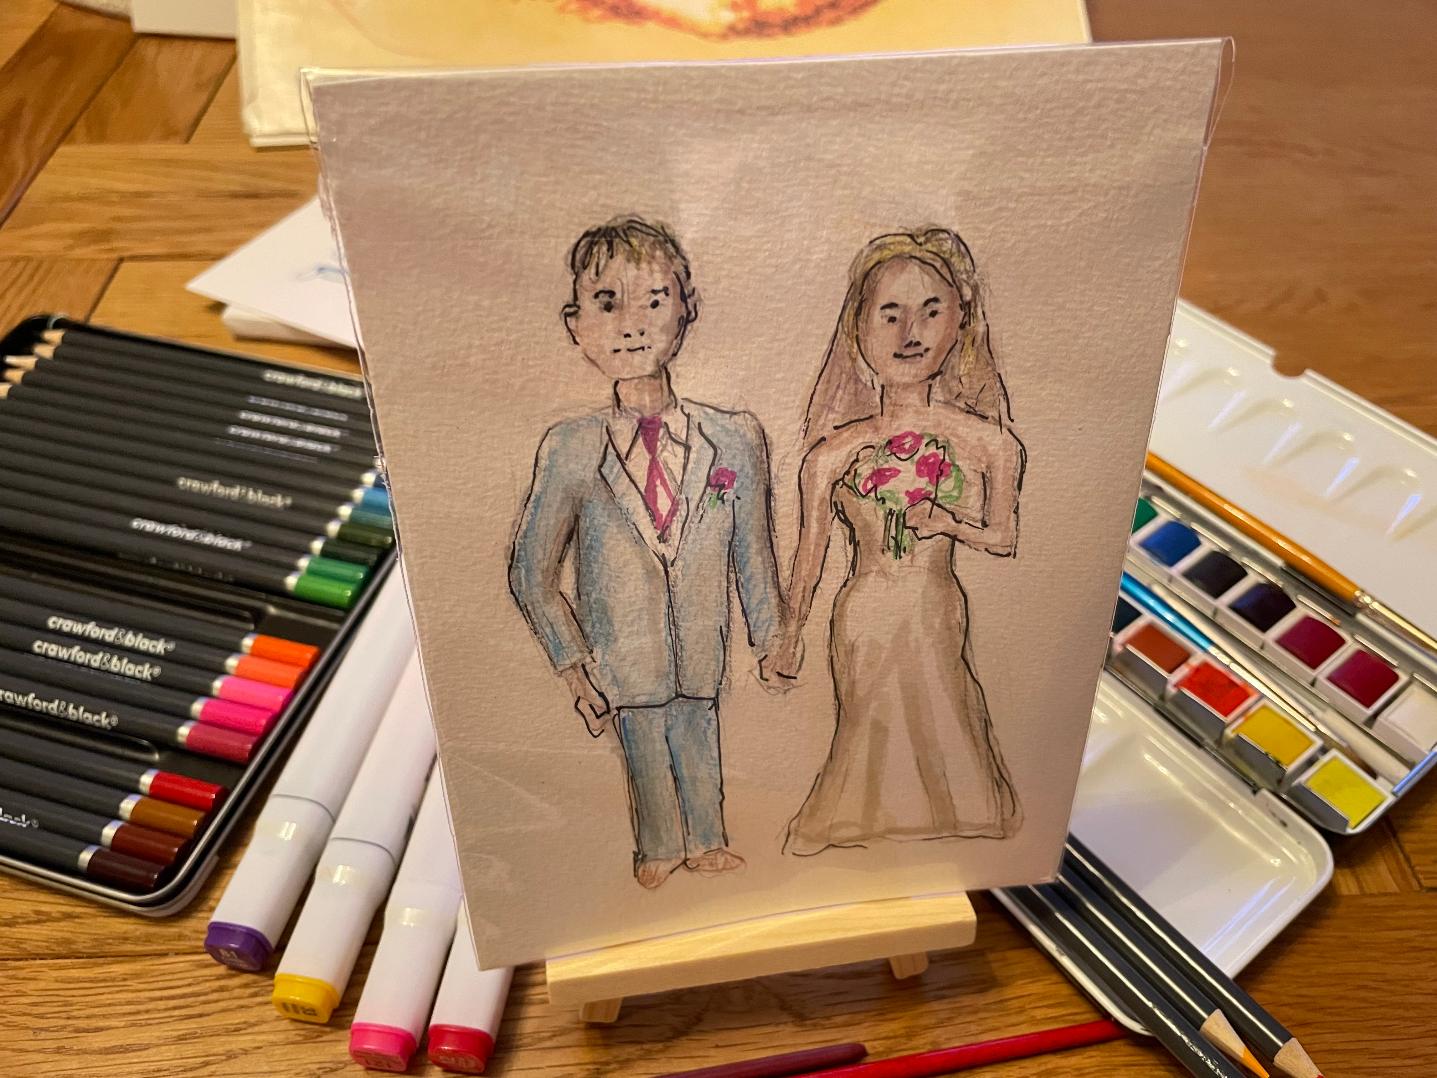 the Norfolk wedding artist Coley, will draw and paint on your wedding day in watercolour.